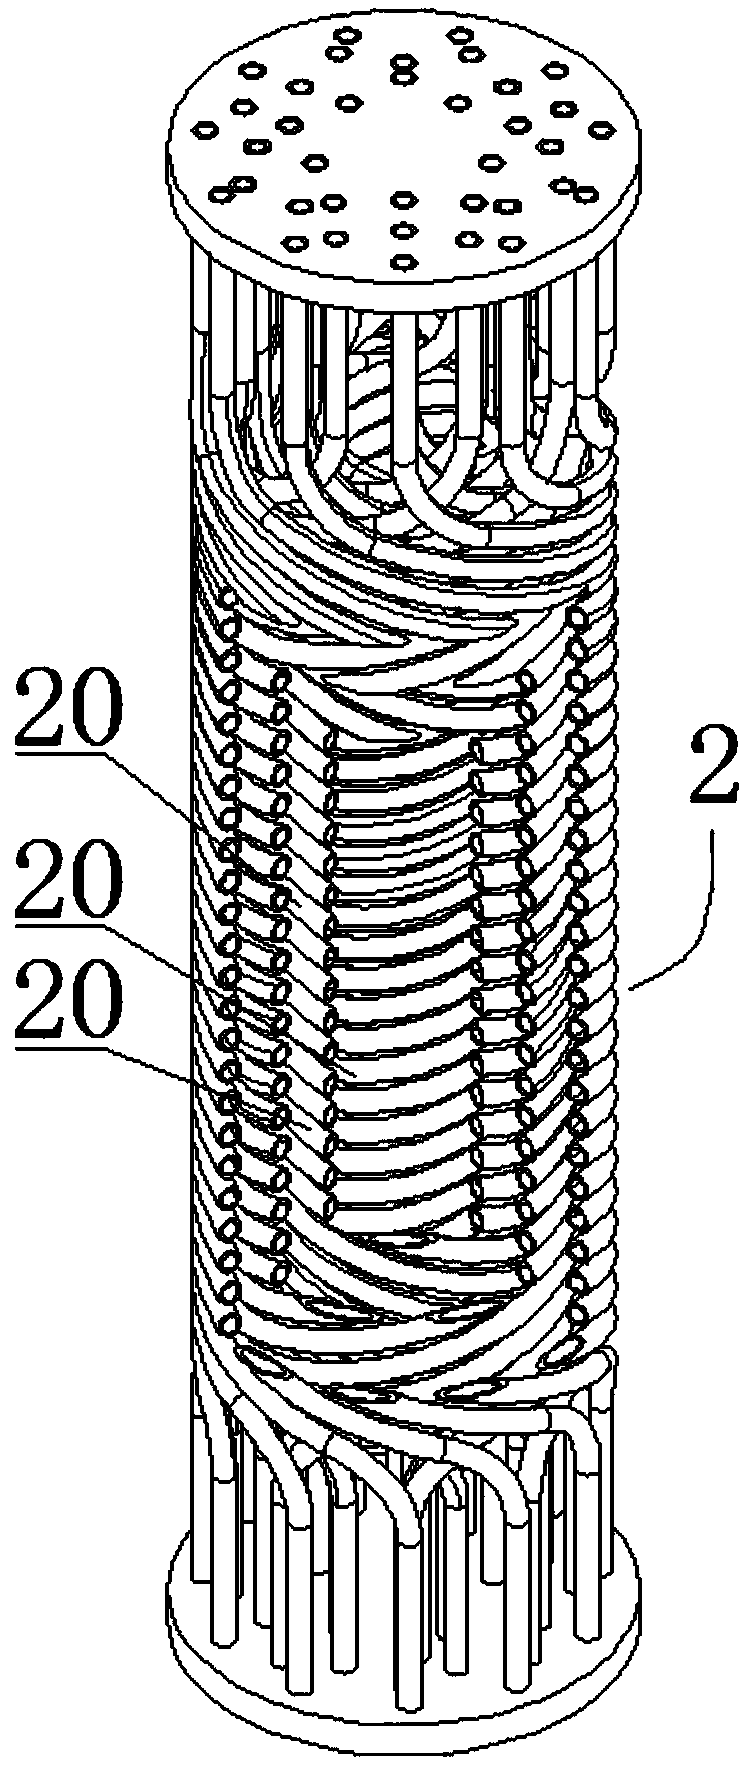 Accurate feeding continuous-flow reaction system capable of quenching